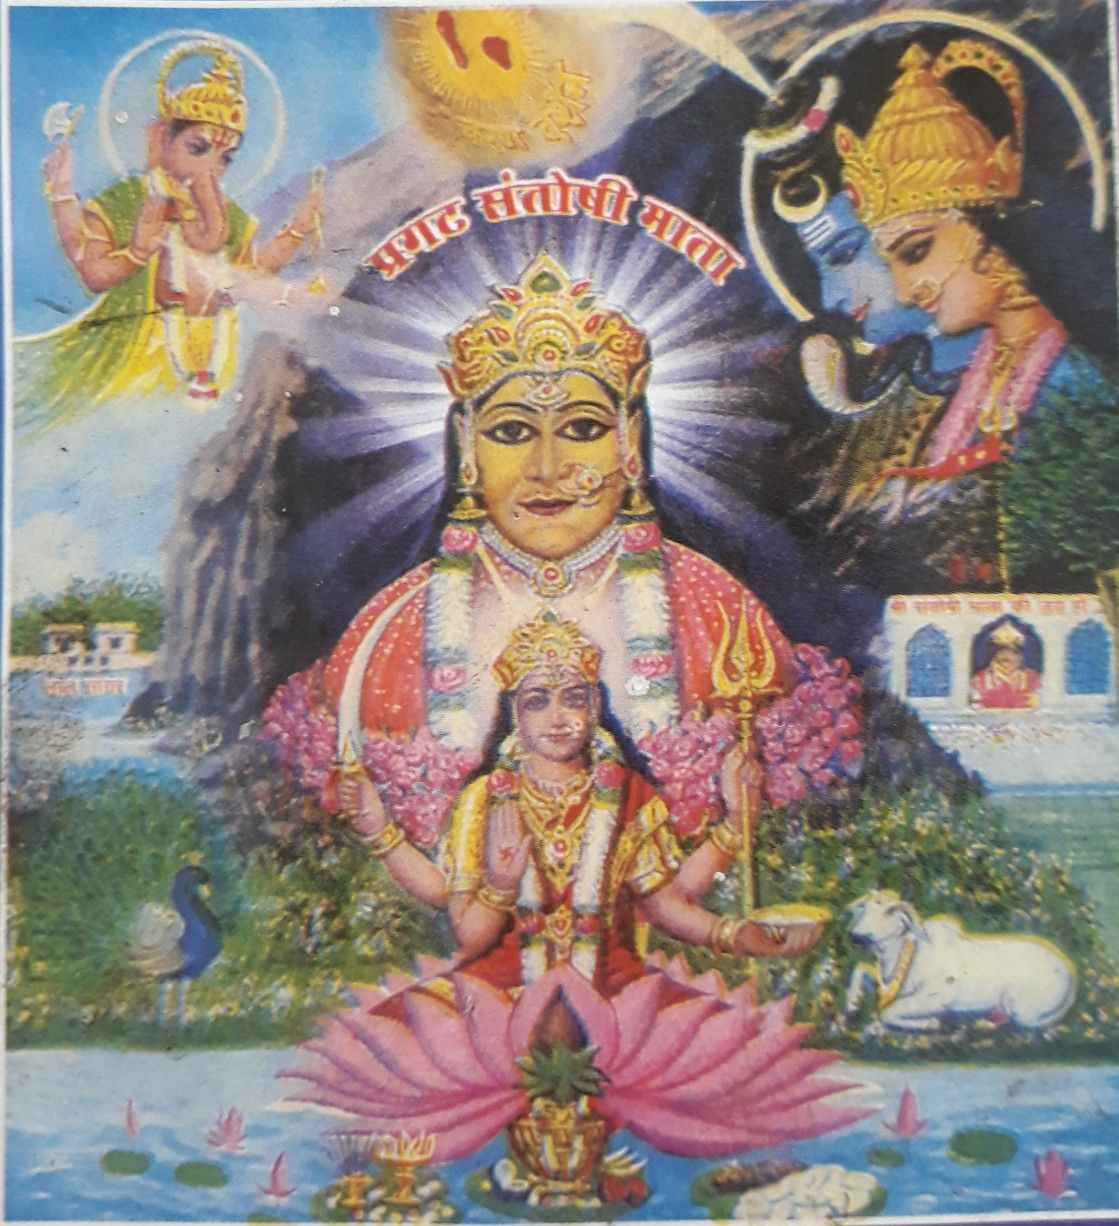 Santoshi Maa ,”the emblem of love, contentment, forgiveness, happiness and